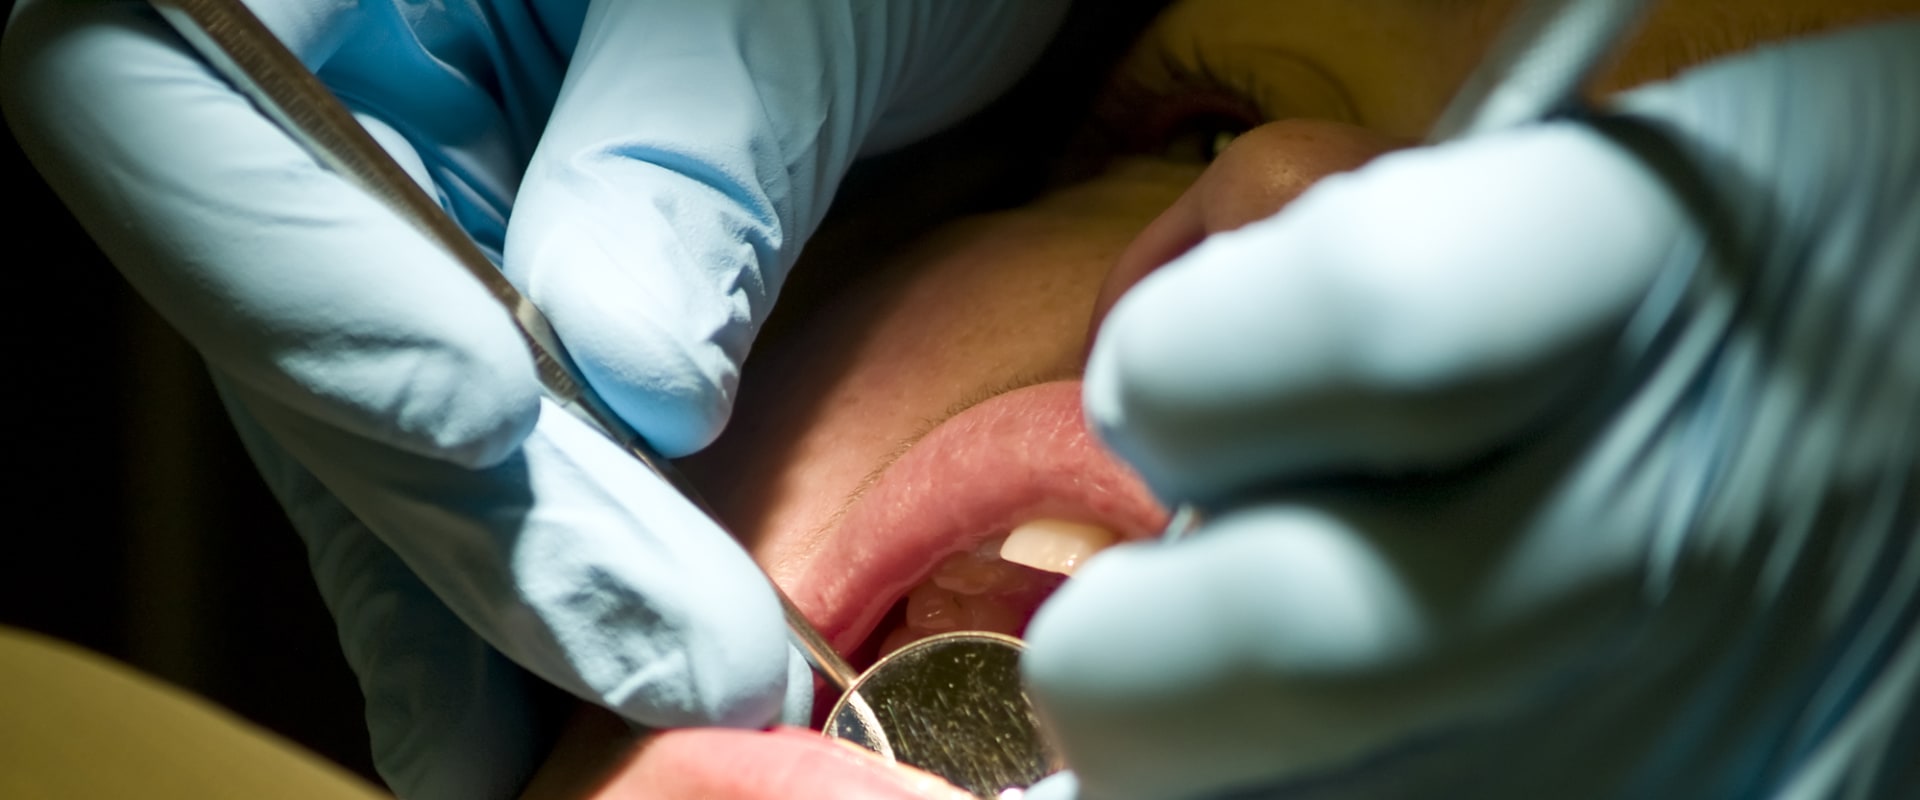 Do Emergency Dentists Perform Root Canals?